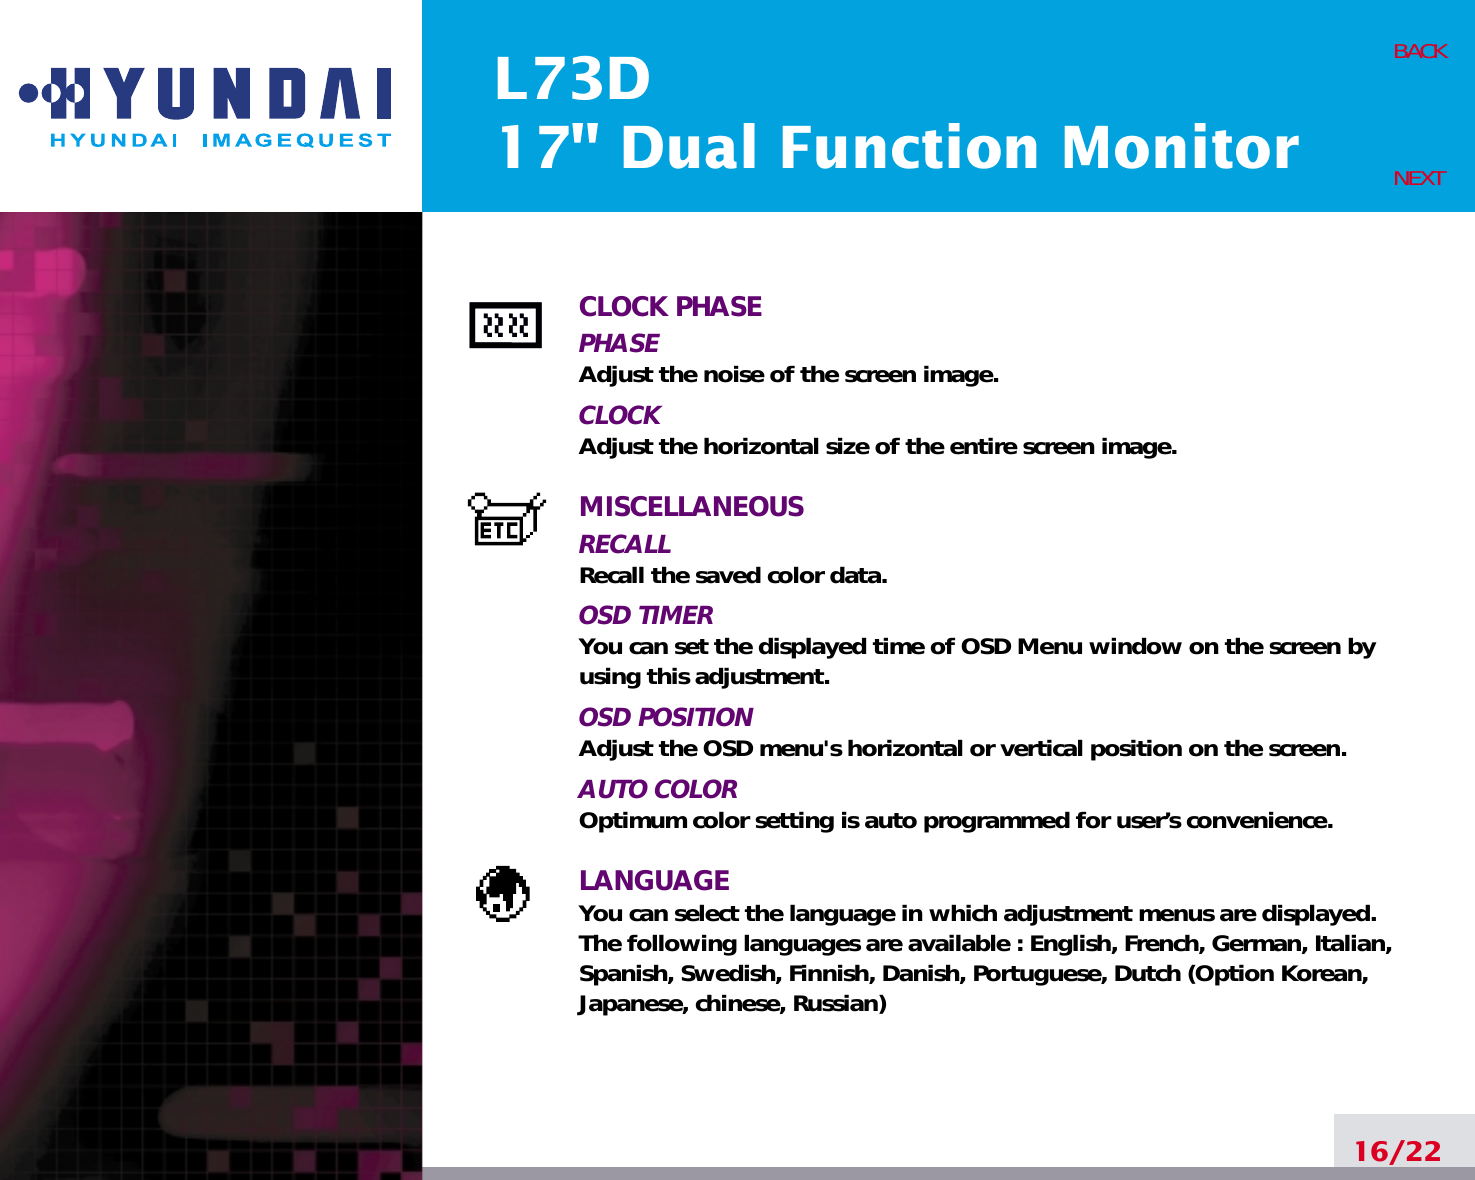 L73D17&quot; Dual Function Monitor16/22BACKNEXTCLOCK PHASEPHASEAdjust the noise of the screen image.CLOCKAdjust the horizontal size of the entire screen image.MISCELLANEOUSRECALL Recall the saved color data.OSD TIMERYou can set the displayed time of OSD Menu window on the screen byusing this adjustment.OSD POSITIONAdjust the OSD menu&apos;s horizontal or vertical position on the screen.AUTO COLOROptimum color setting is auto programmed for user’s convenience.LANGUAGEYou can select the language in which adjustment menus are displayed.The following languages are available : English, French, German, Italian,Spanish, Swedish, Finnish, Danish, Portuguese, Dutch (Option Korean,Japanese, chinese, Russian)